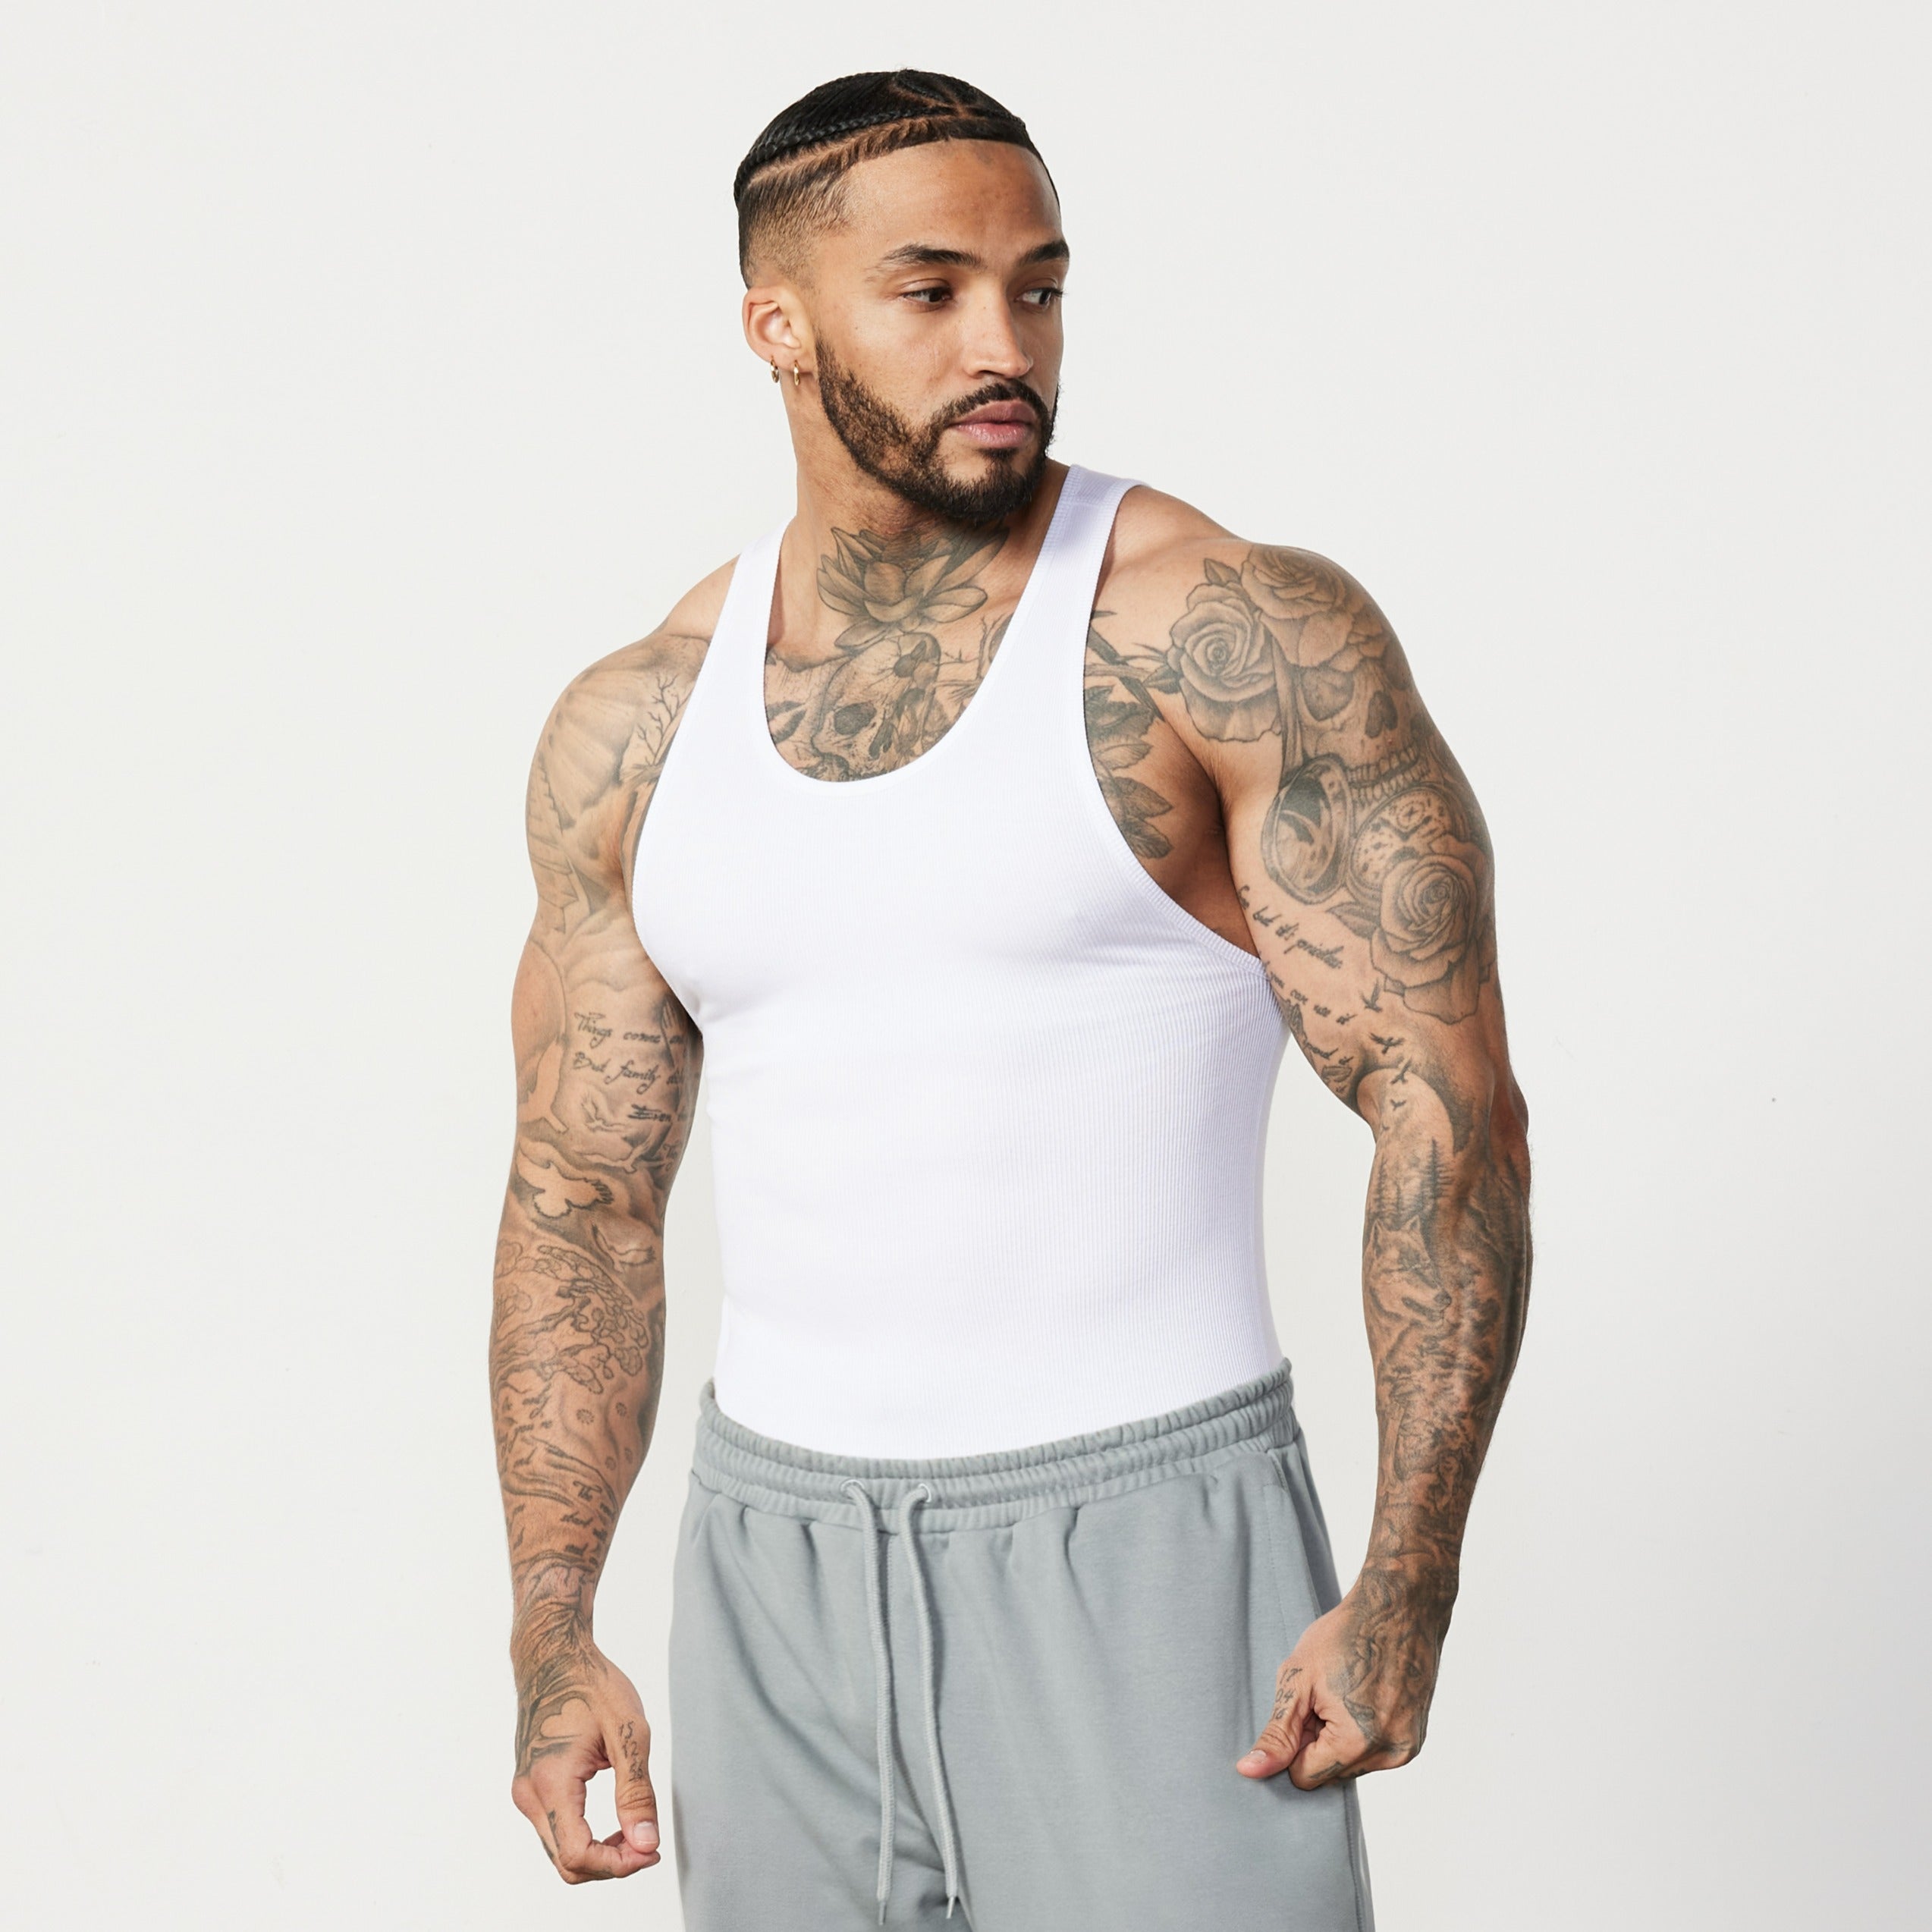 Vanquish White Ribbed Fitted Tank